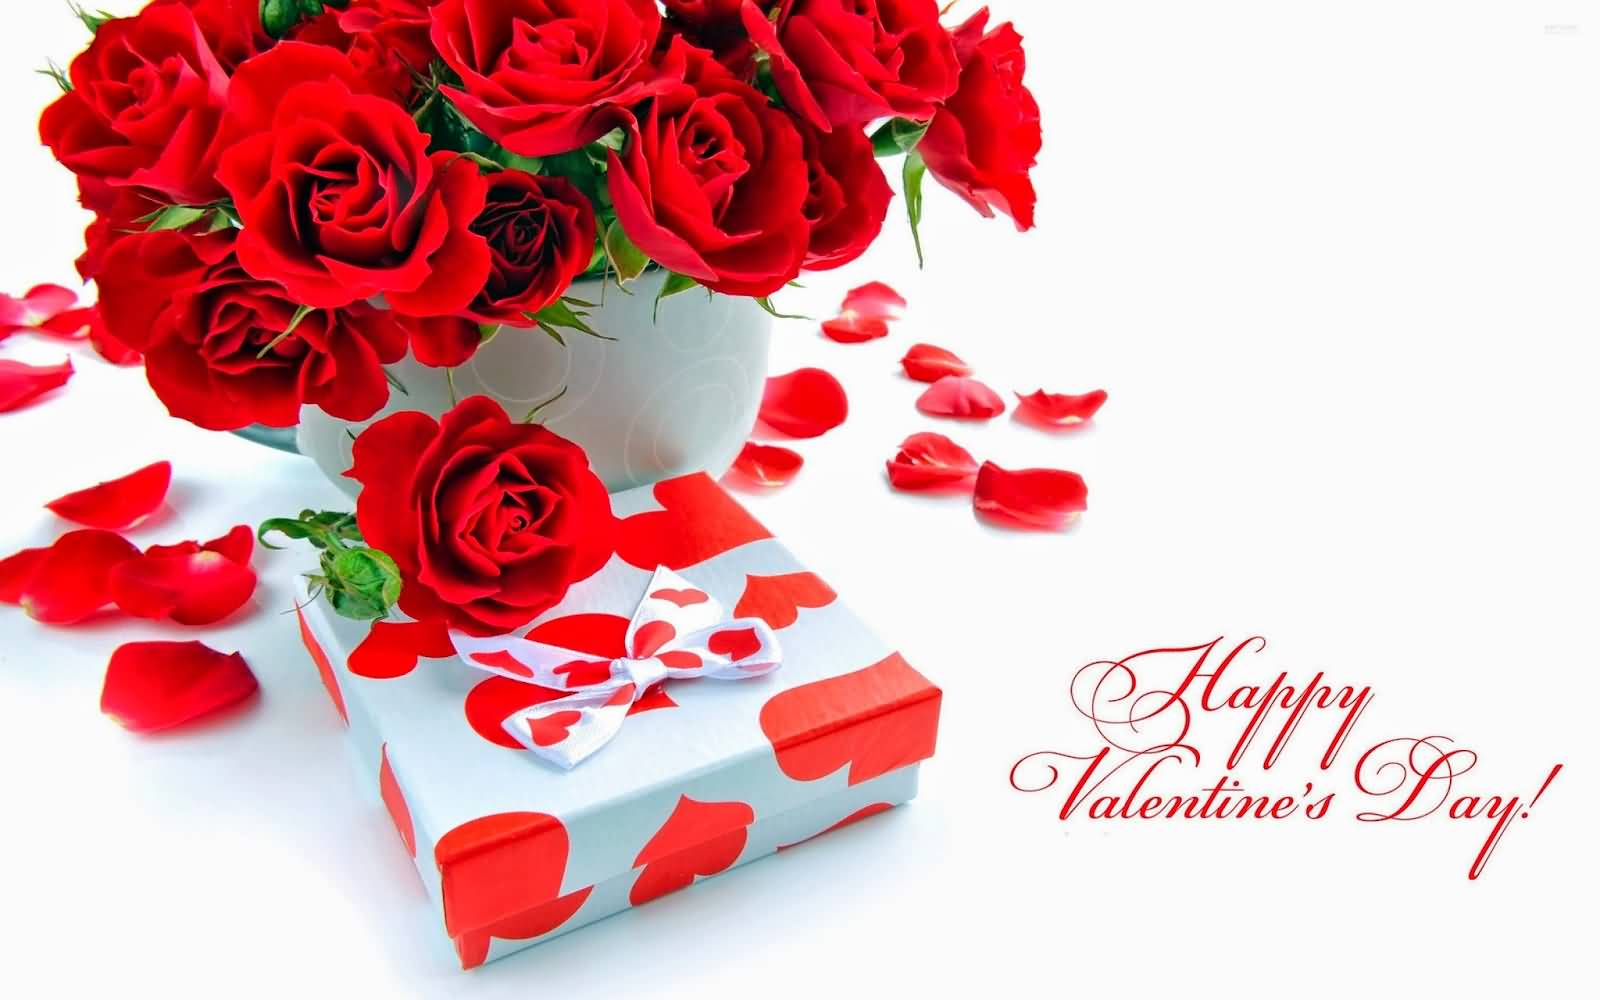 Happy Valentine's Day Flowers And Gift Box